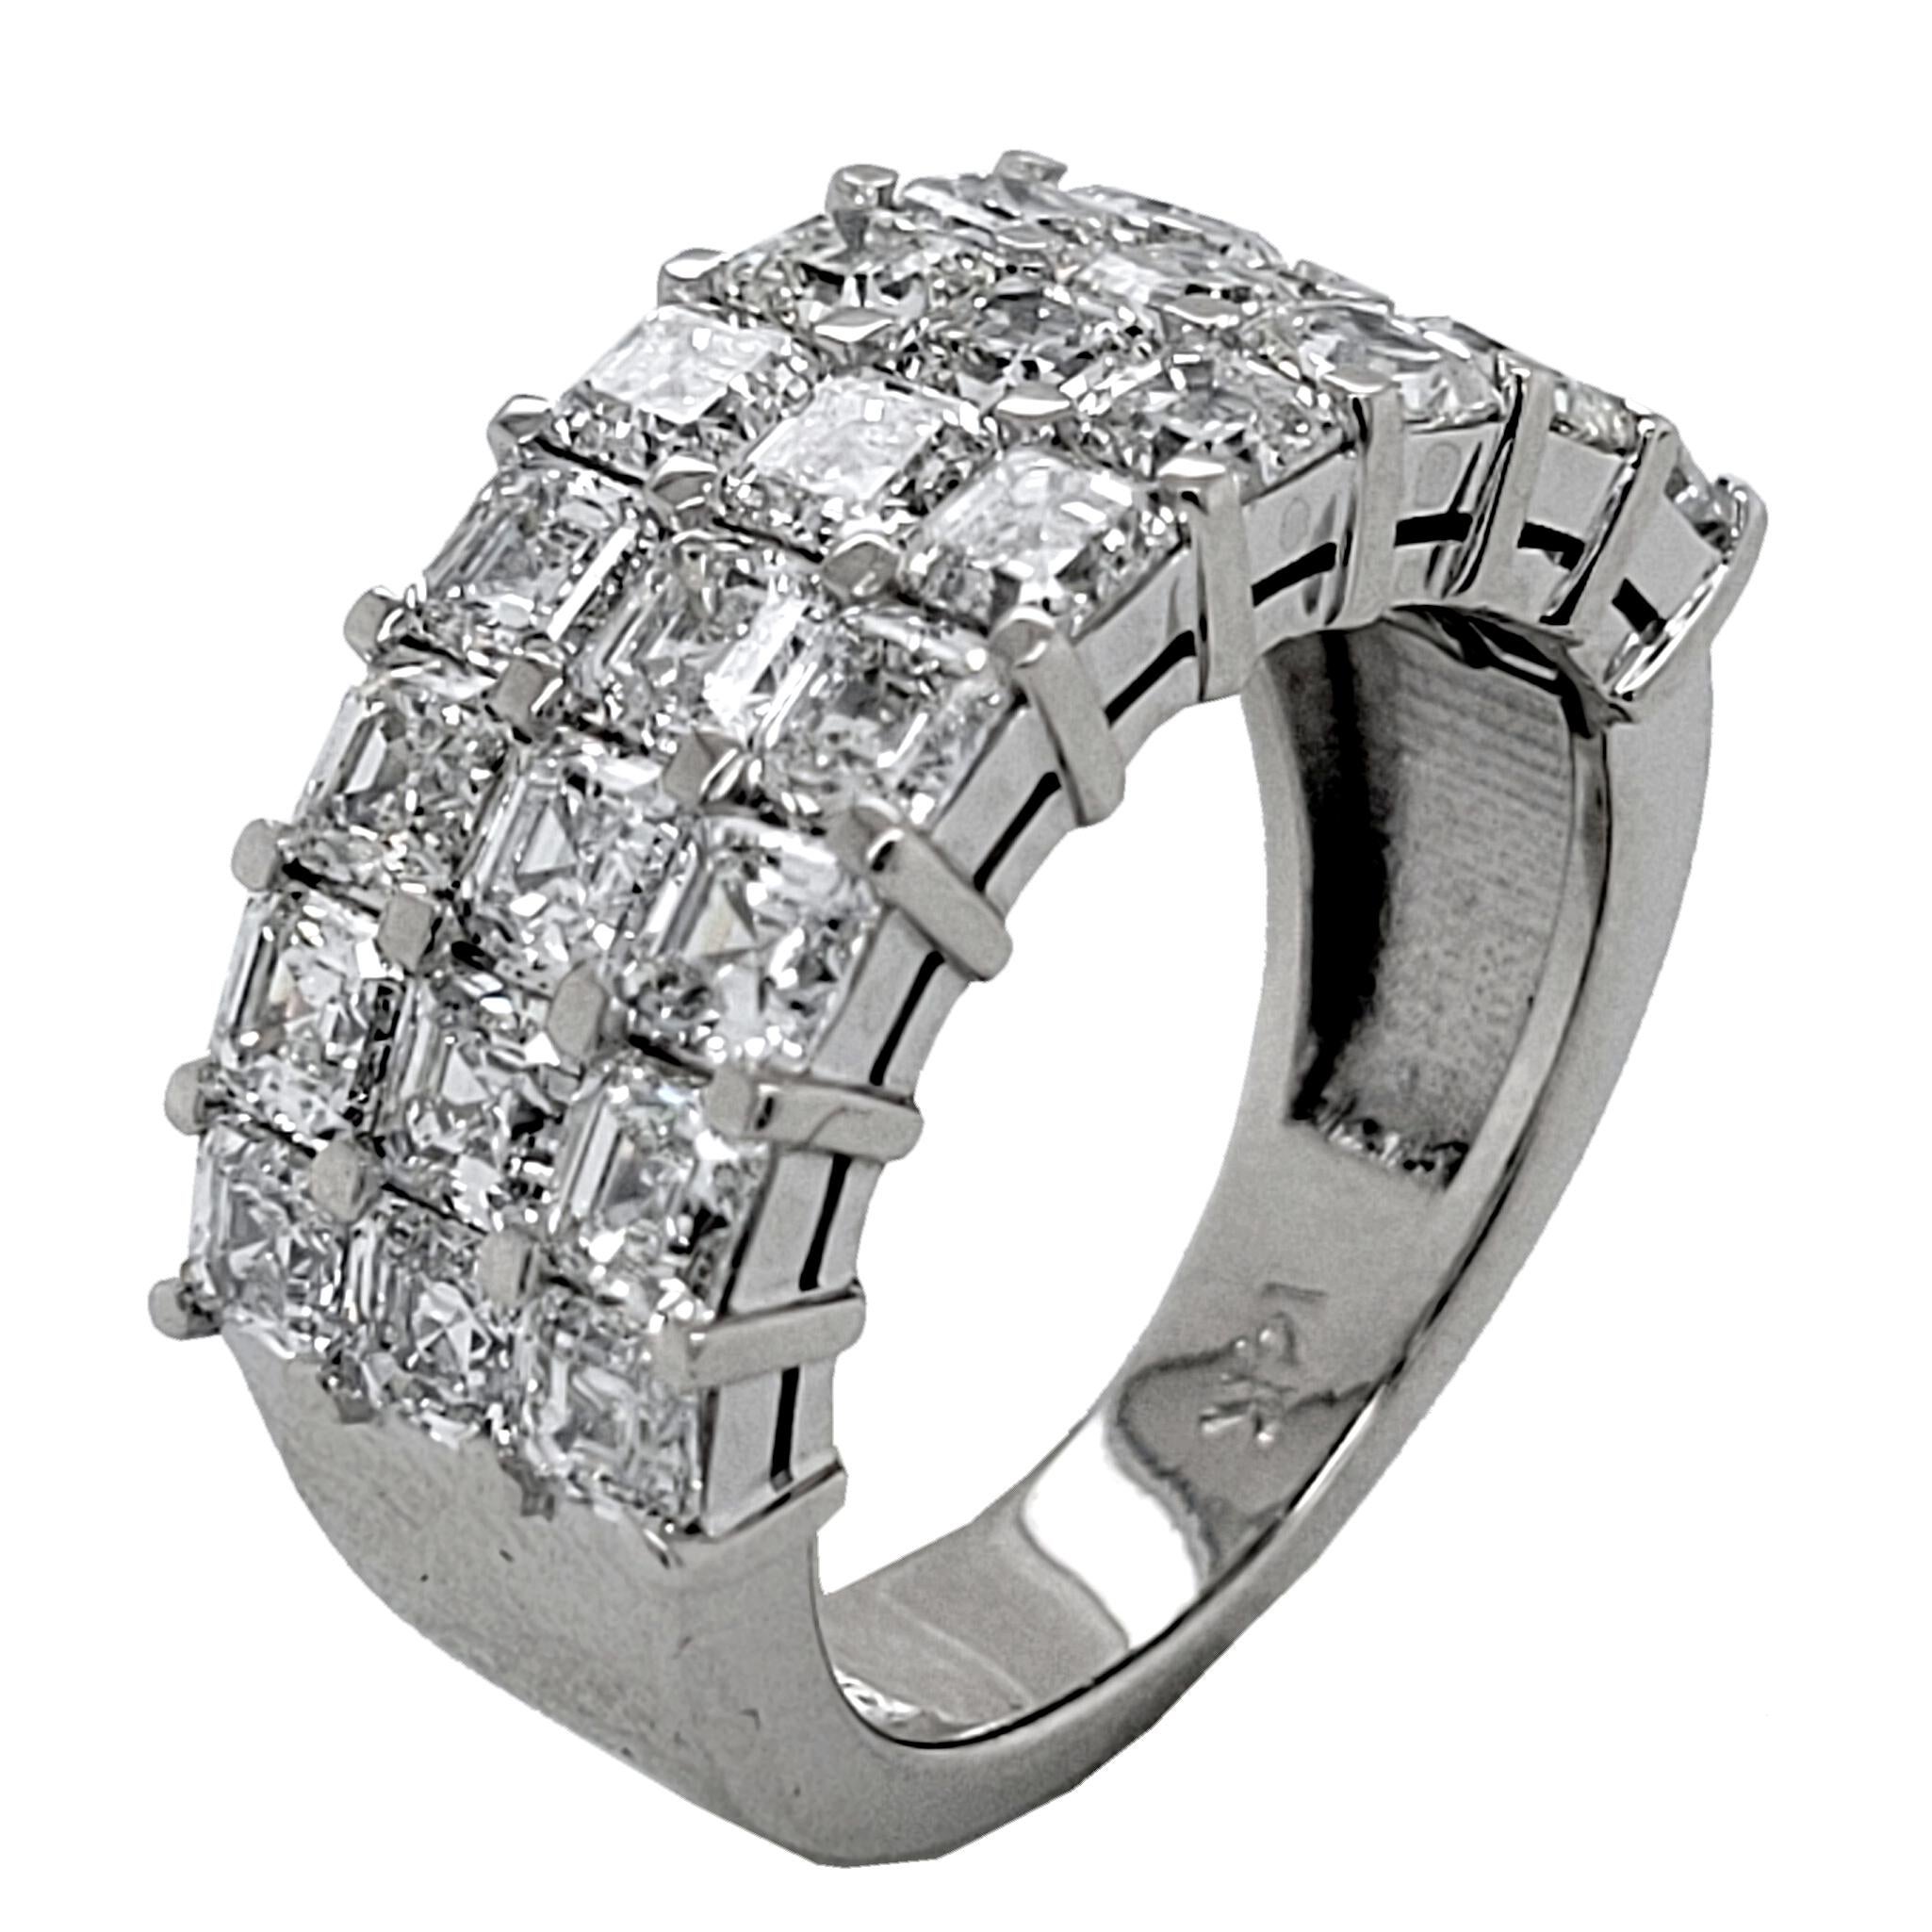 This beautiful Anniversary Ring is made of 14 Karat White gold showcasing 27 perfectly matched Asscher Cut (Square Emerald Cut) Diamonds Set in Shared Prong Mode.
The diamonds are VS Clarity E to F Color.
Total Weight of diamonds: 4.20 Ct  (27